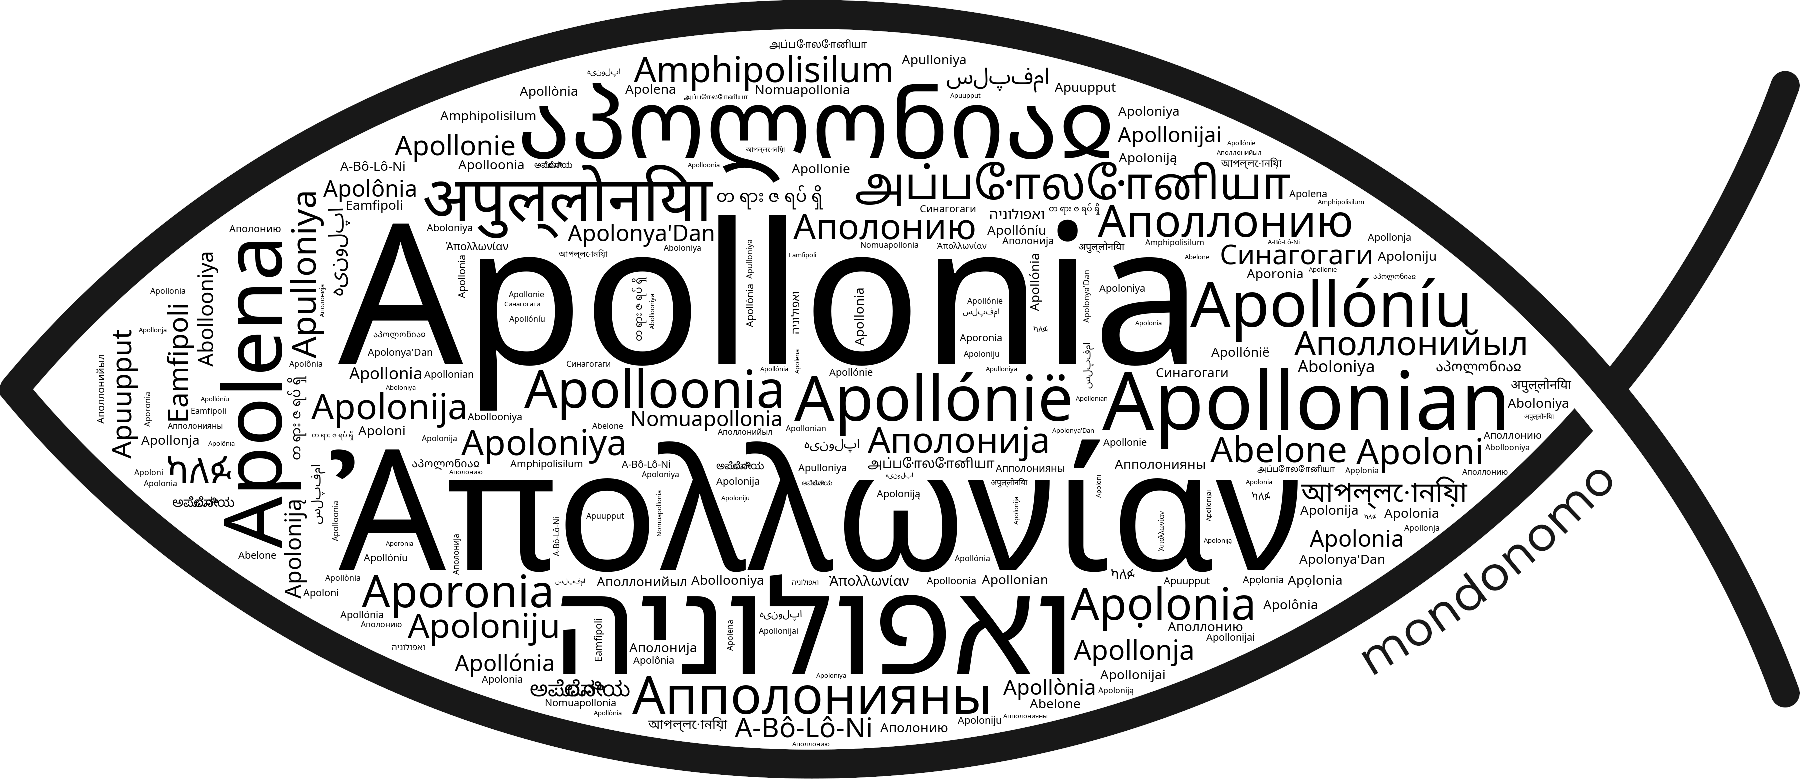 Name Apollonia in the world's Bibles